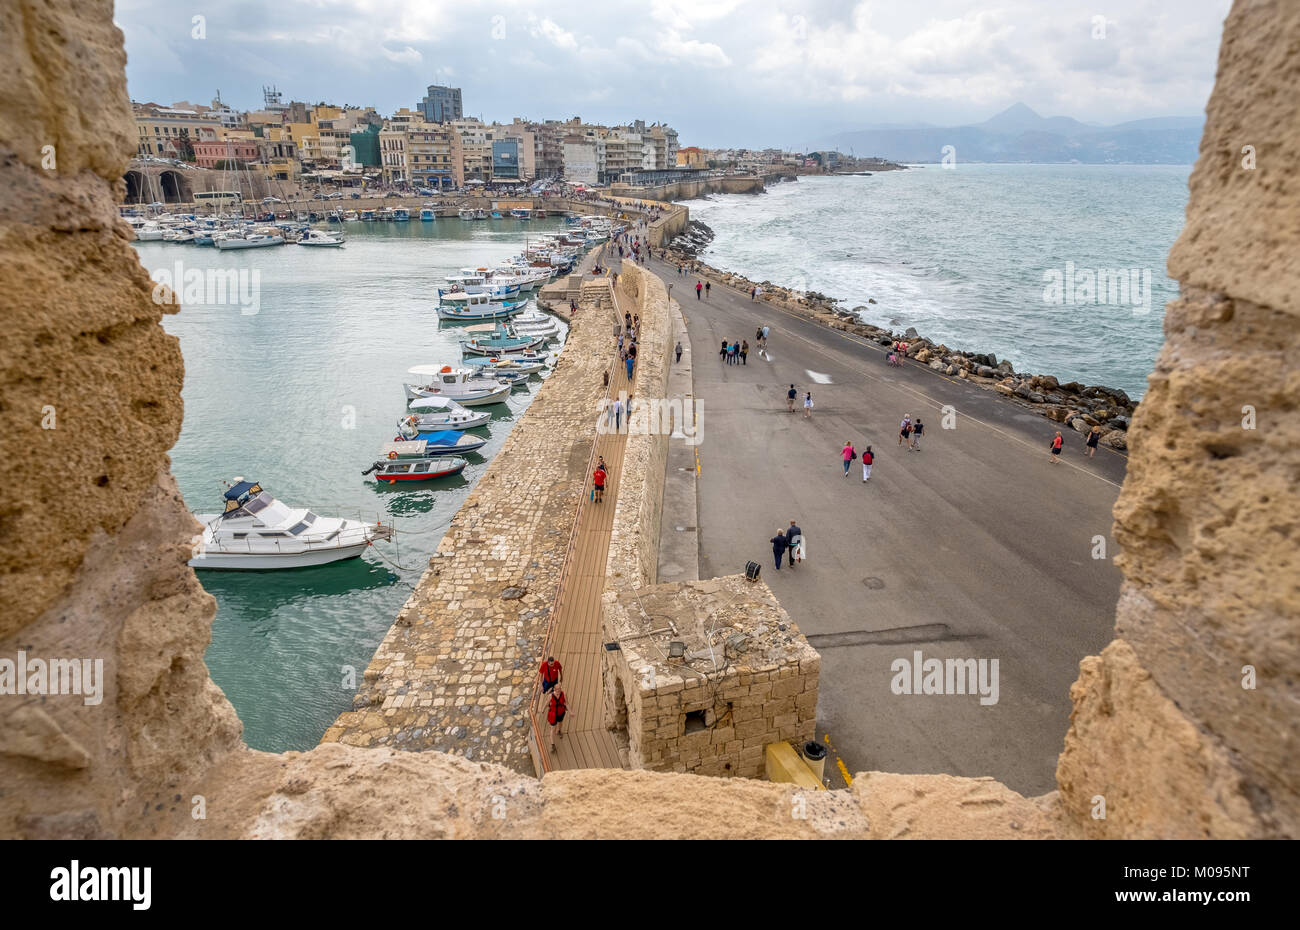 View of the access road to Koules Fortress or Rocca al Mare Fortress, Venetian Port of Heraklion, Heraklion, Crete, Greece, Europe, Heraklion, Europe, Stock Photo